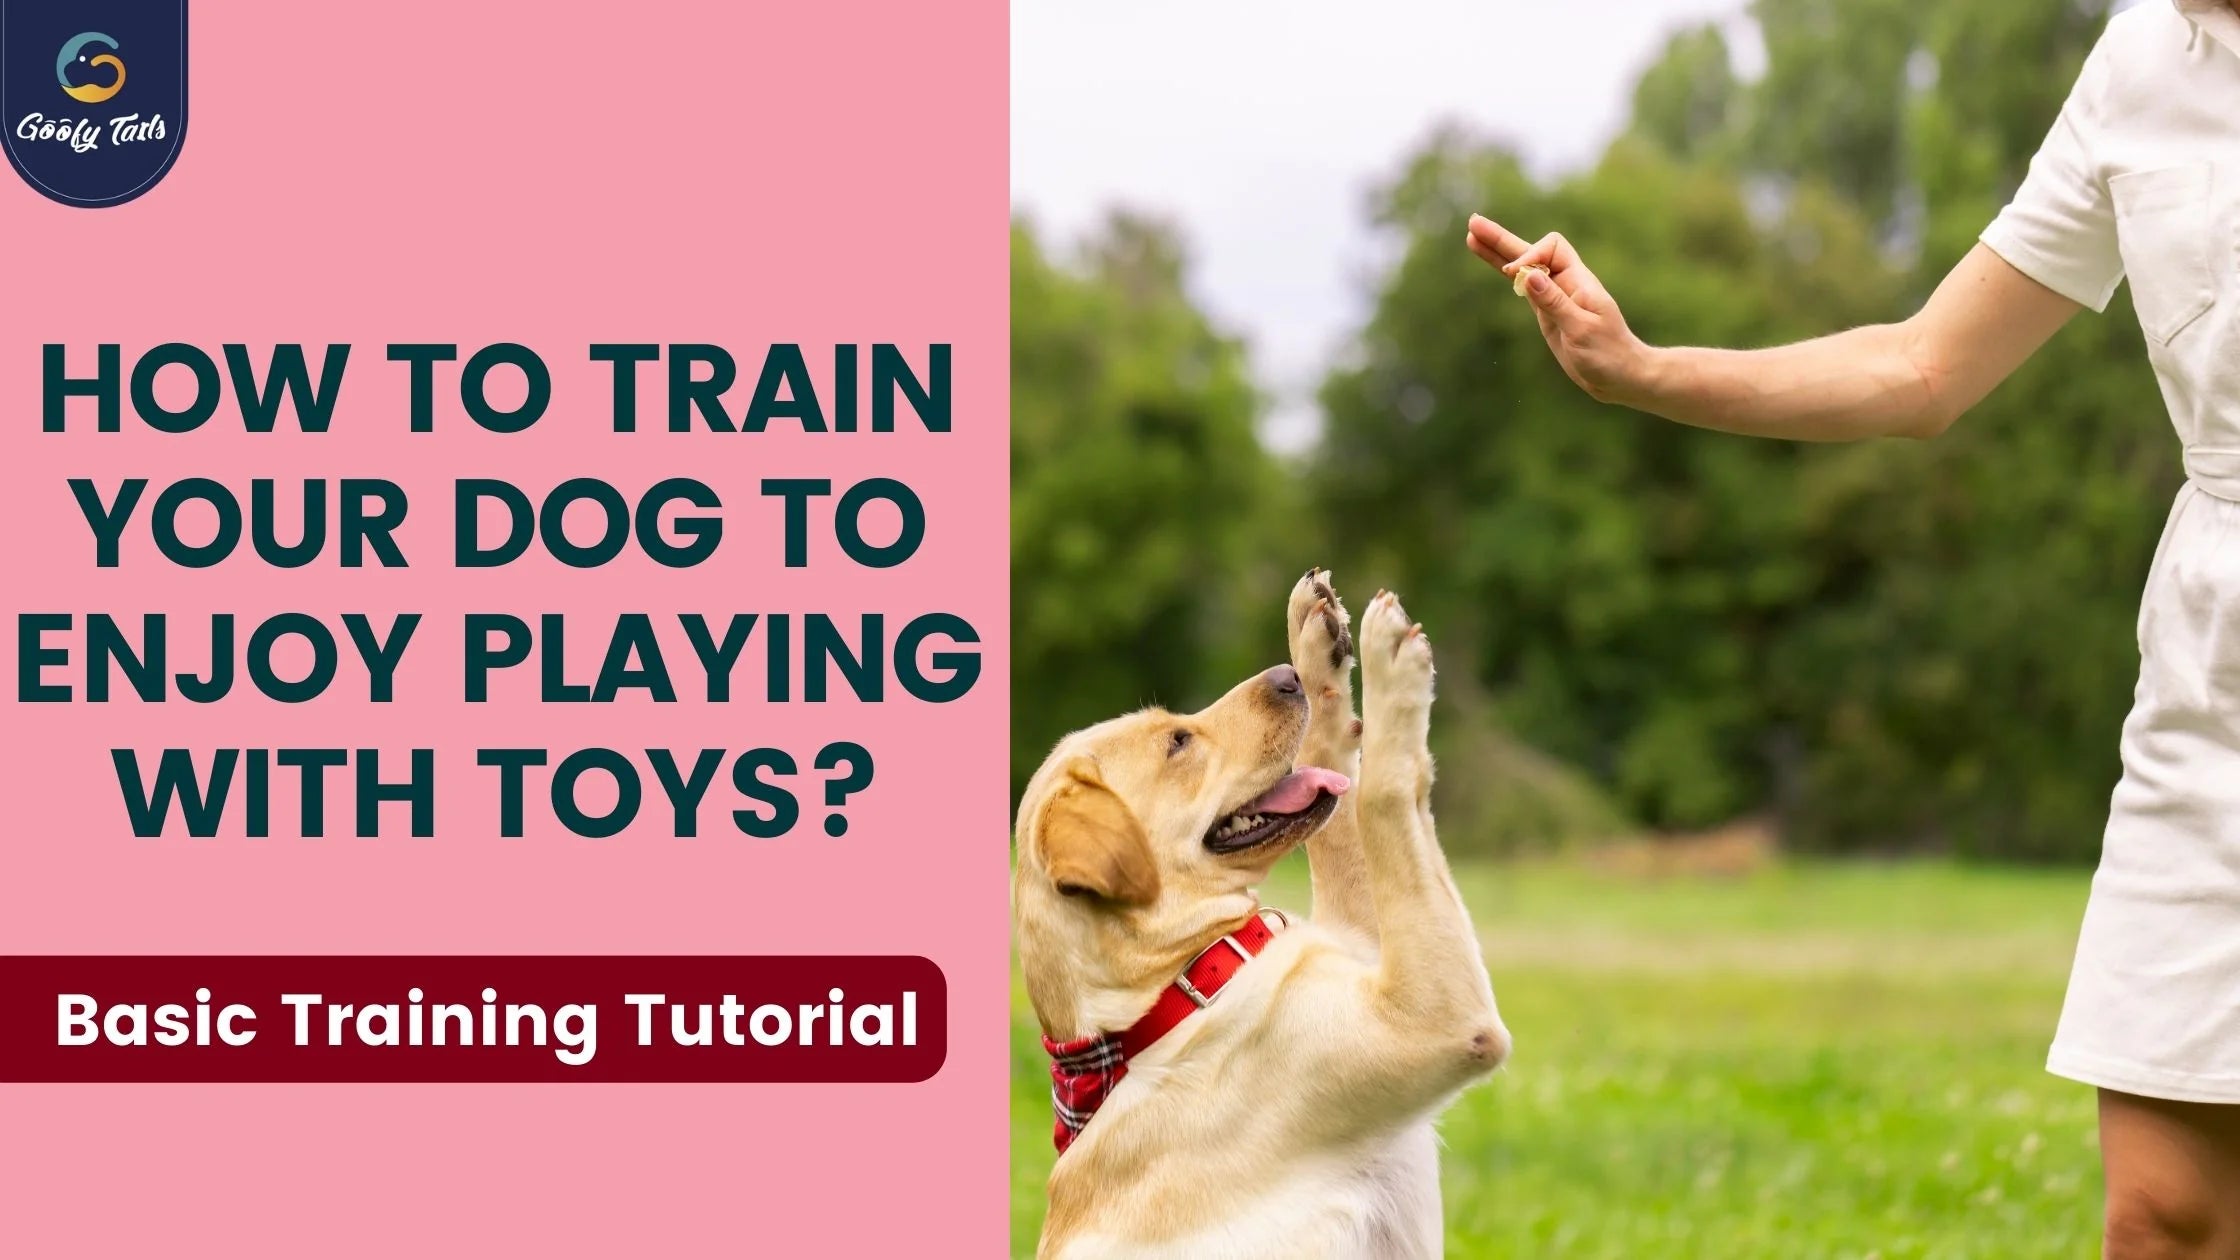 How to Train Your Dog to Enjoy Playing with Toys?